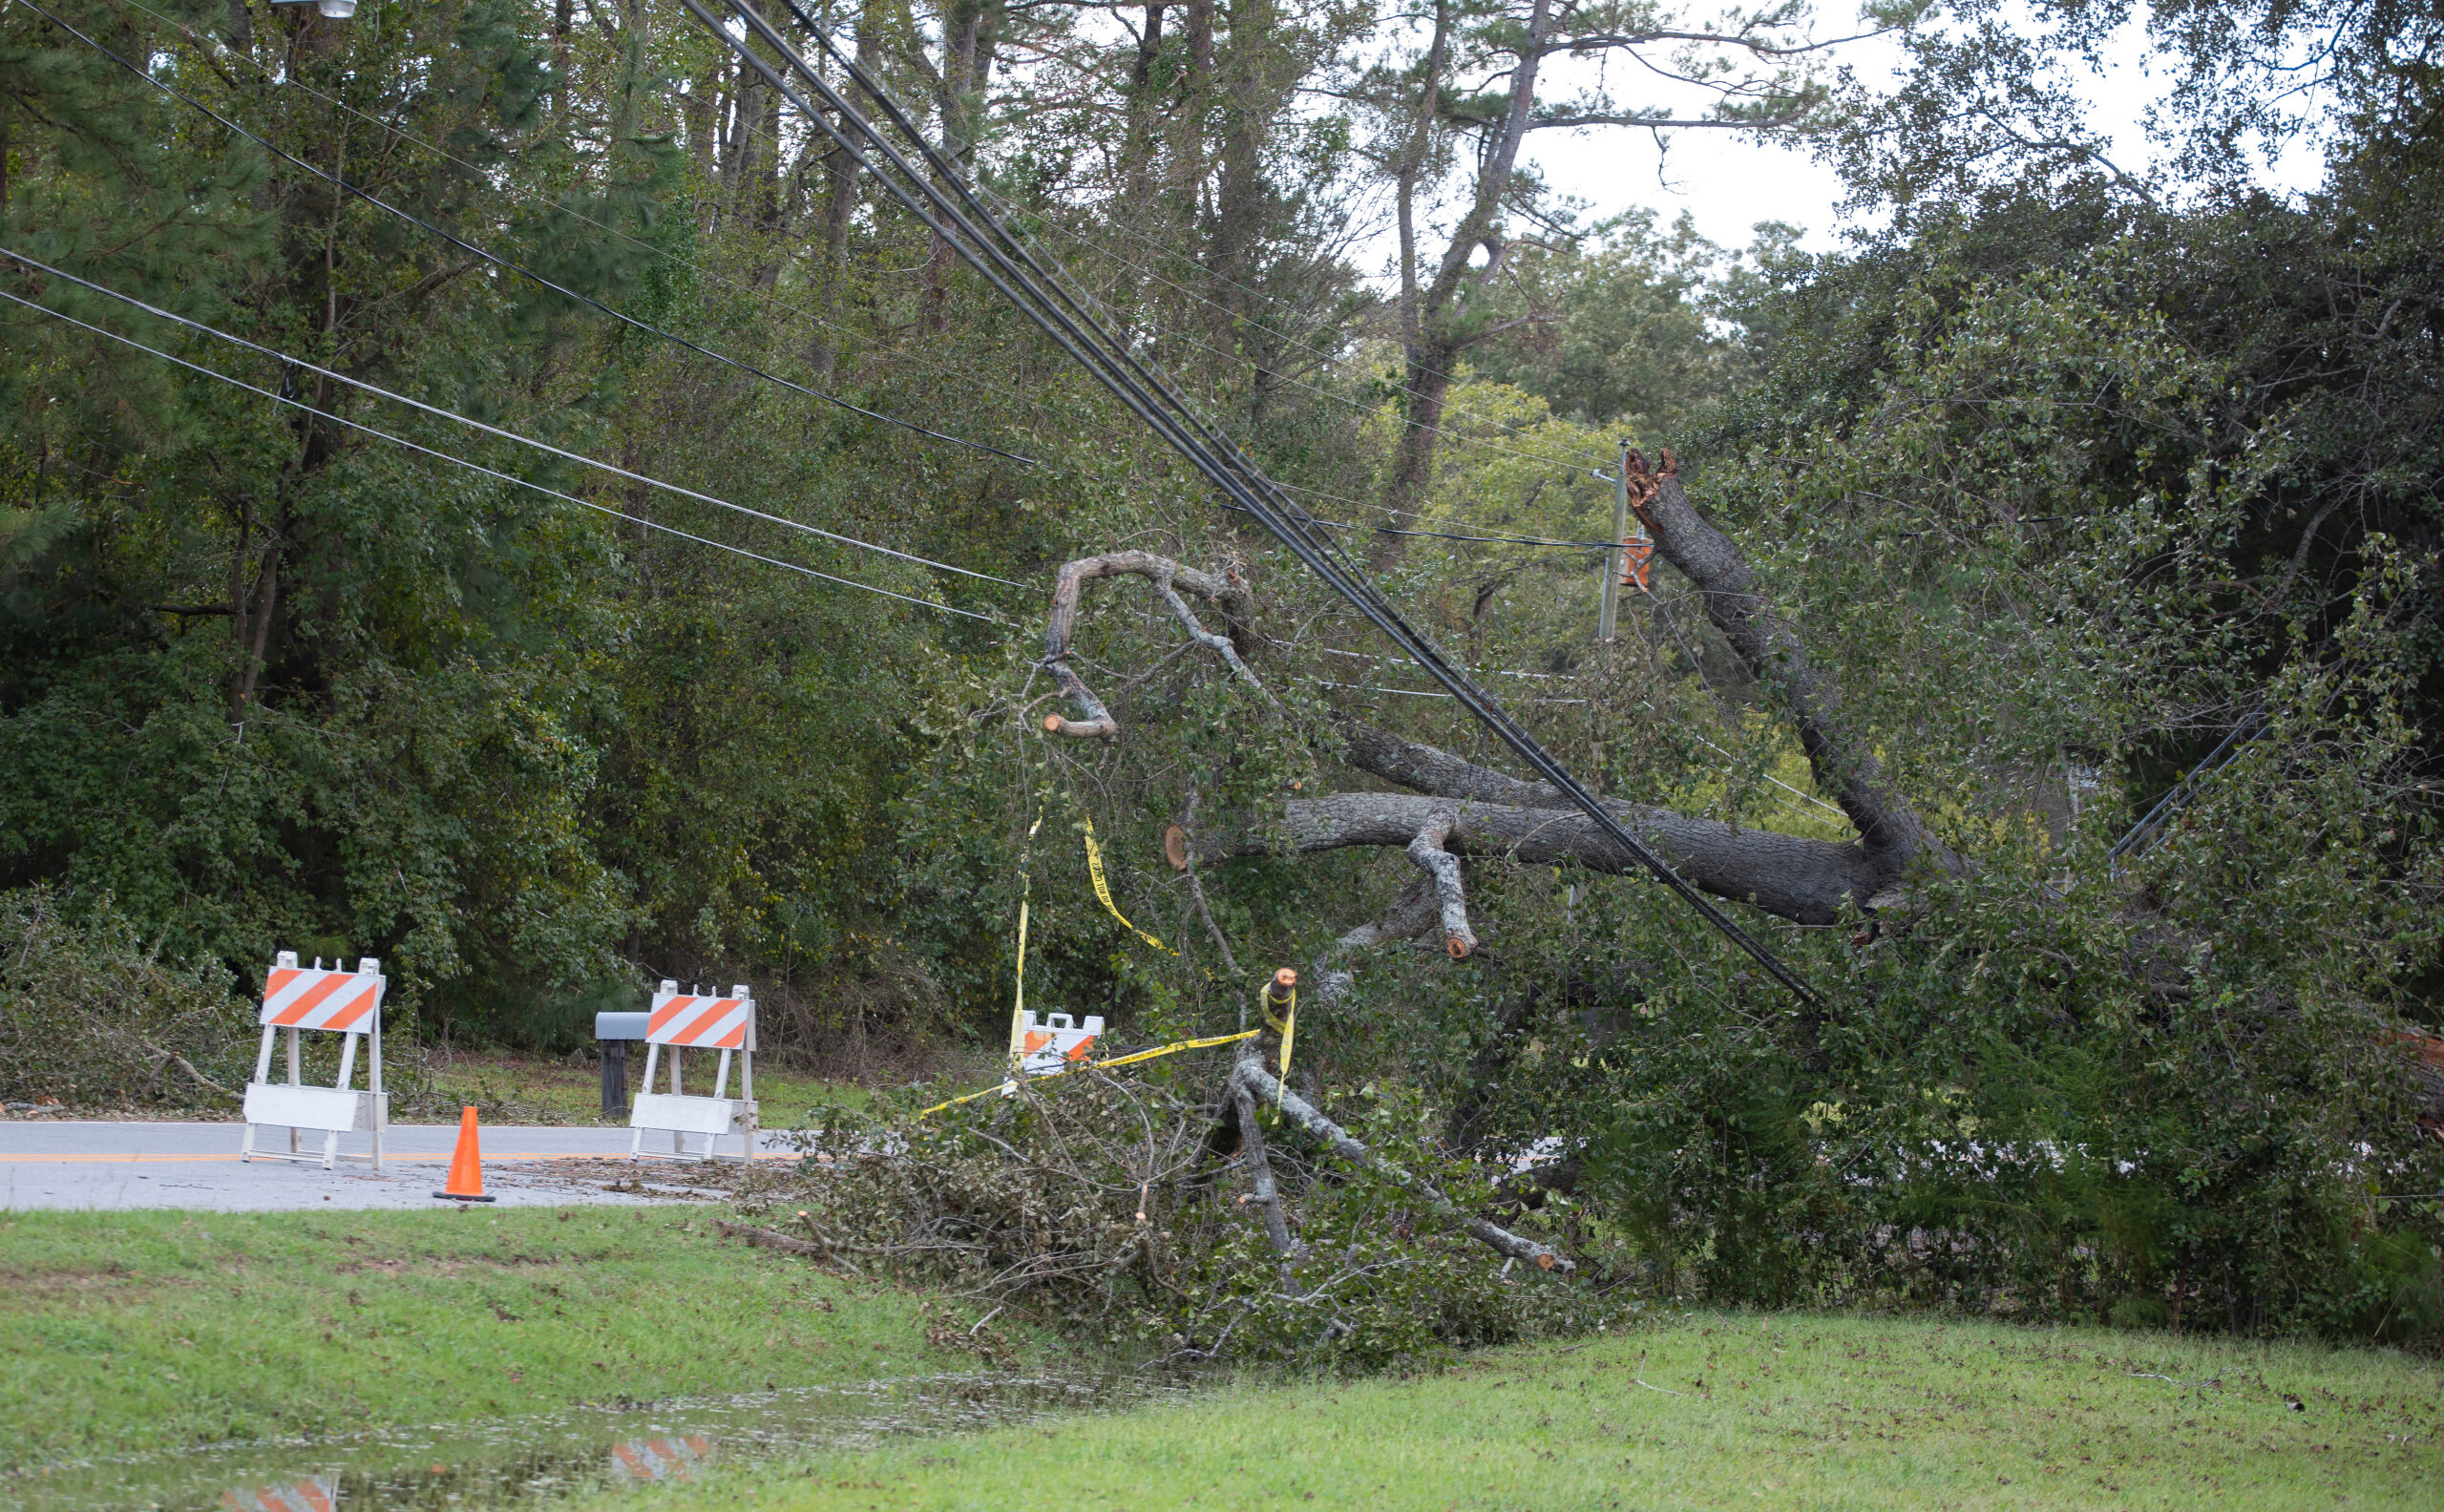 Downed power lines, caused by a falling tree during a storm.